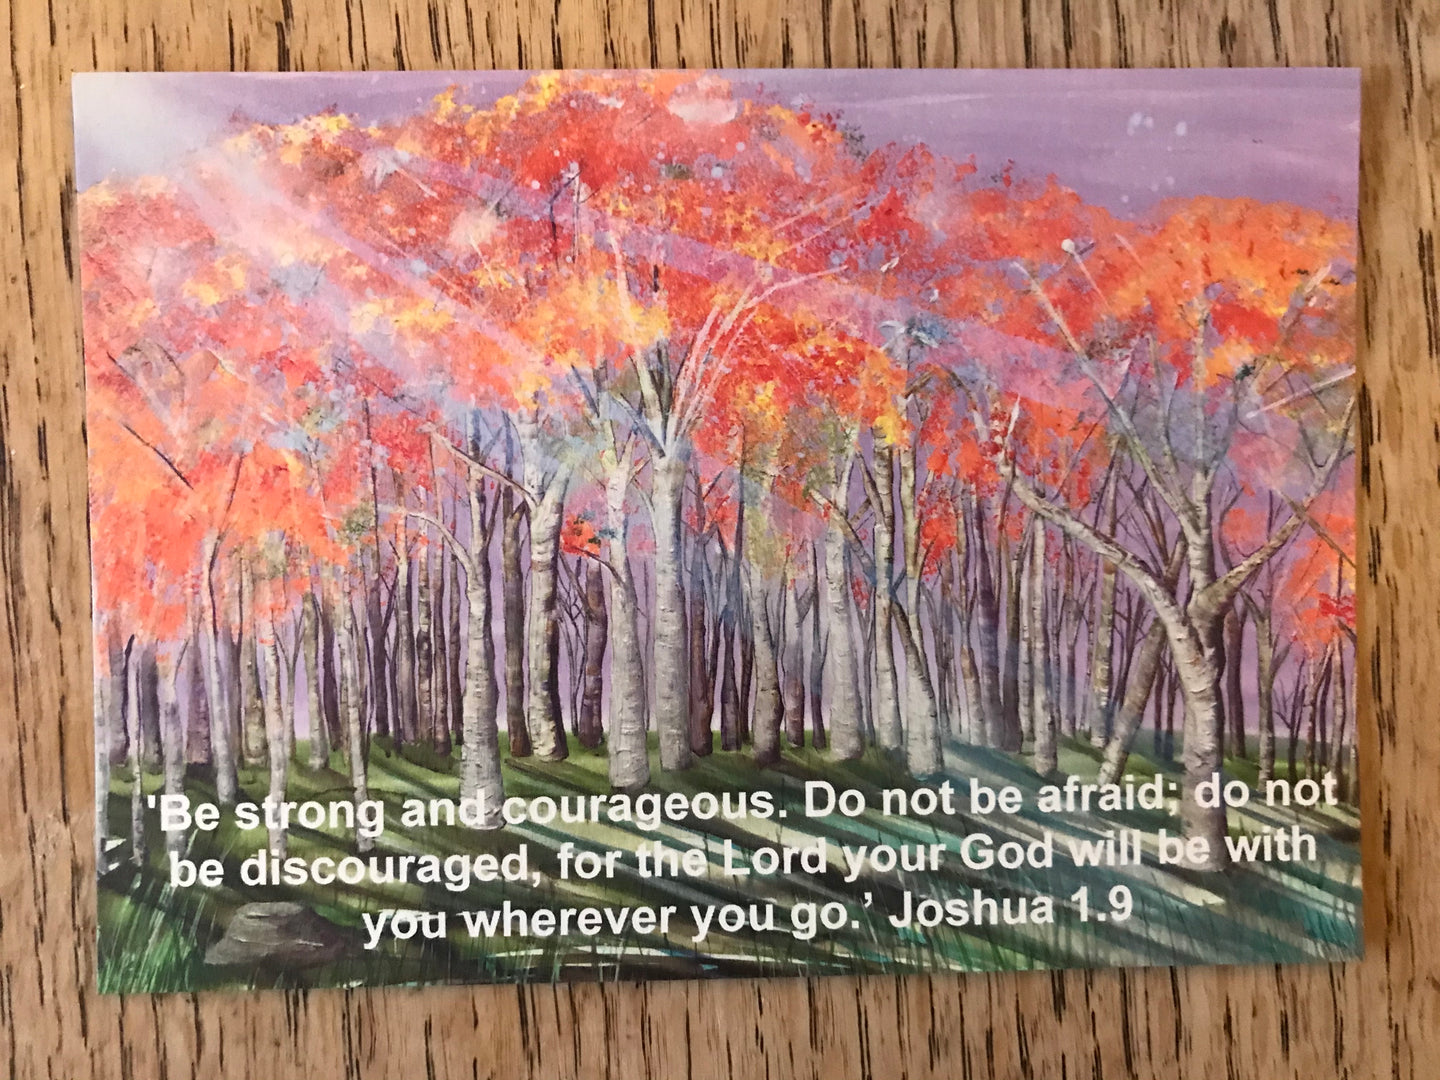 Postcard of encouragement: be strong and courageous